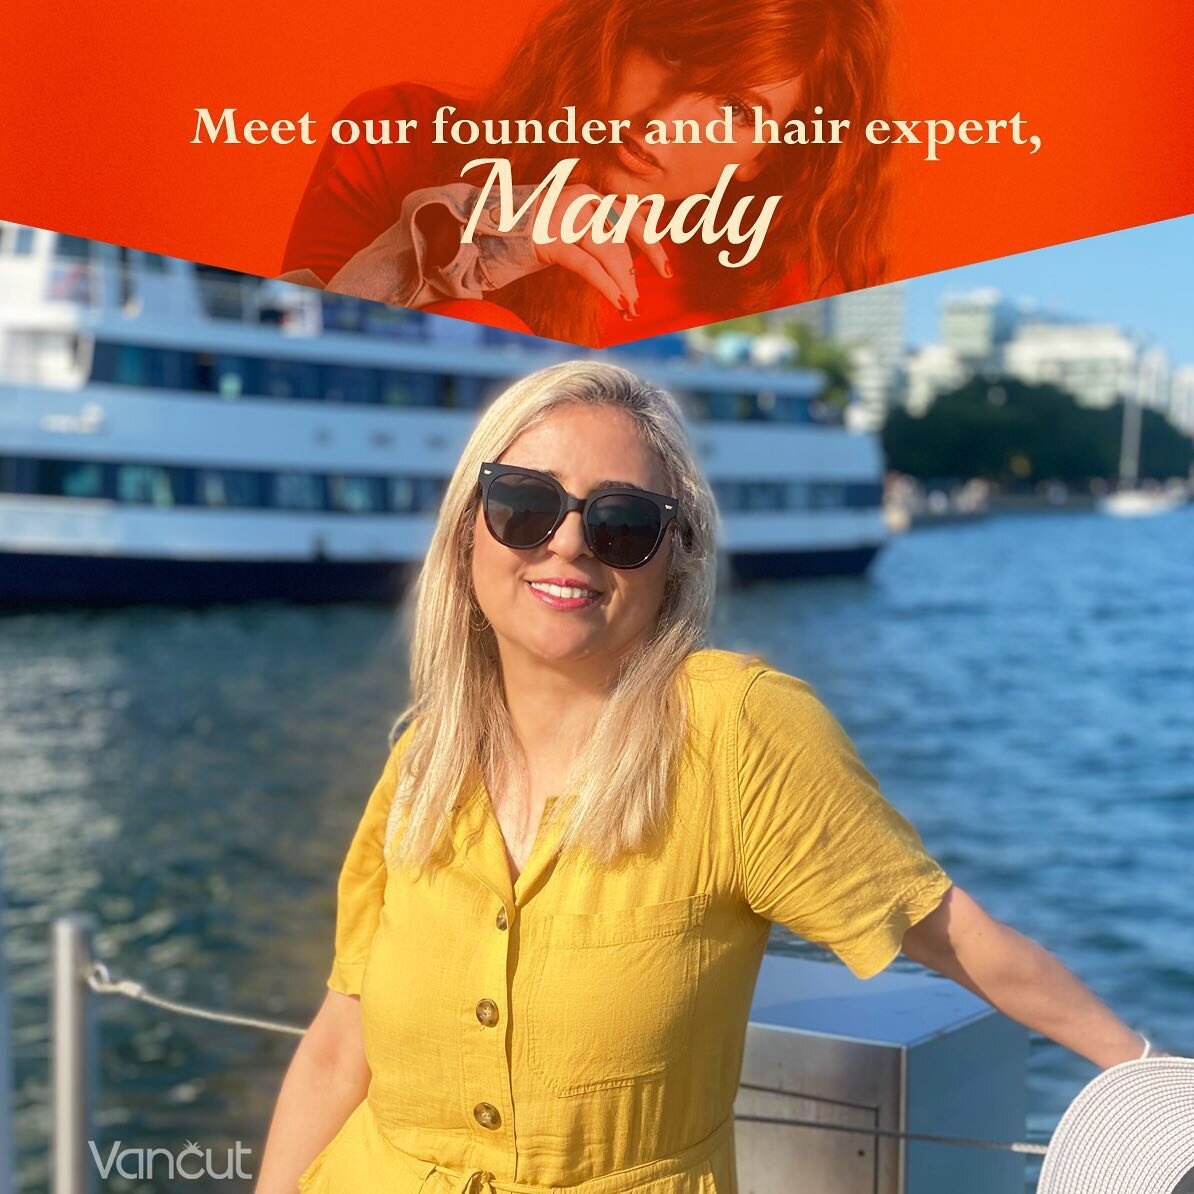 Mandy founded Vancut Hair Salon in 2011 from her passion for hairstyling and creative work. Vancut was built on the fundamental elements of transparency, hard-work, excellence, and professionalism. We became central Coquitlam&rsquo;s only contemporar